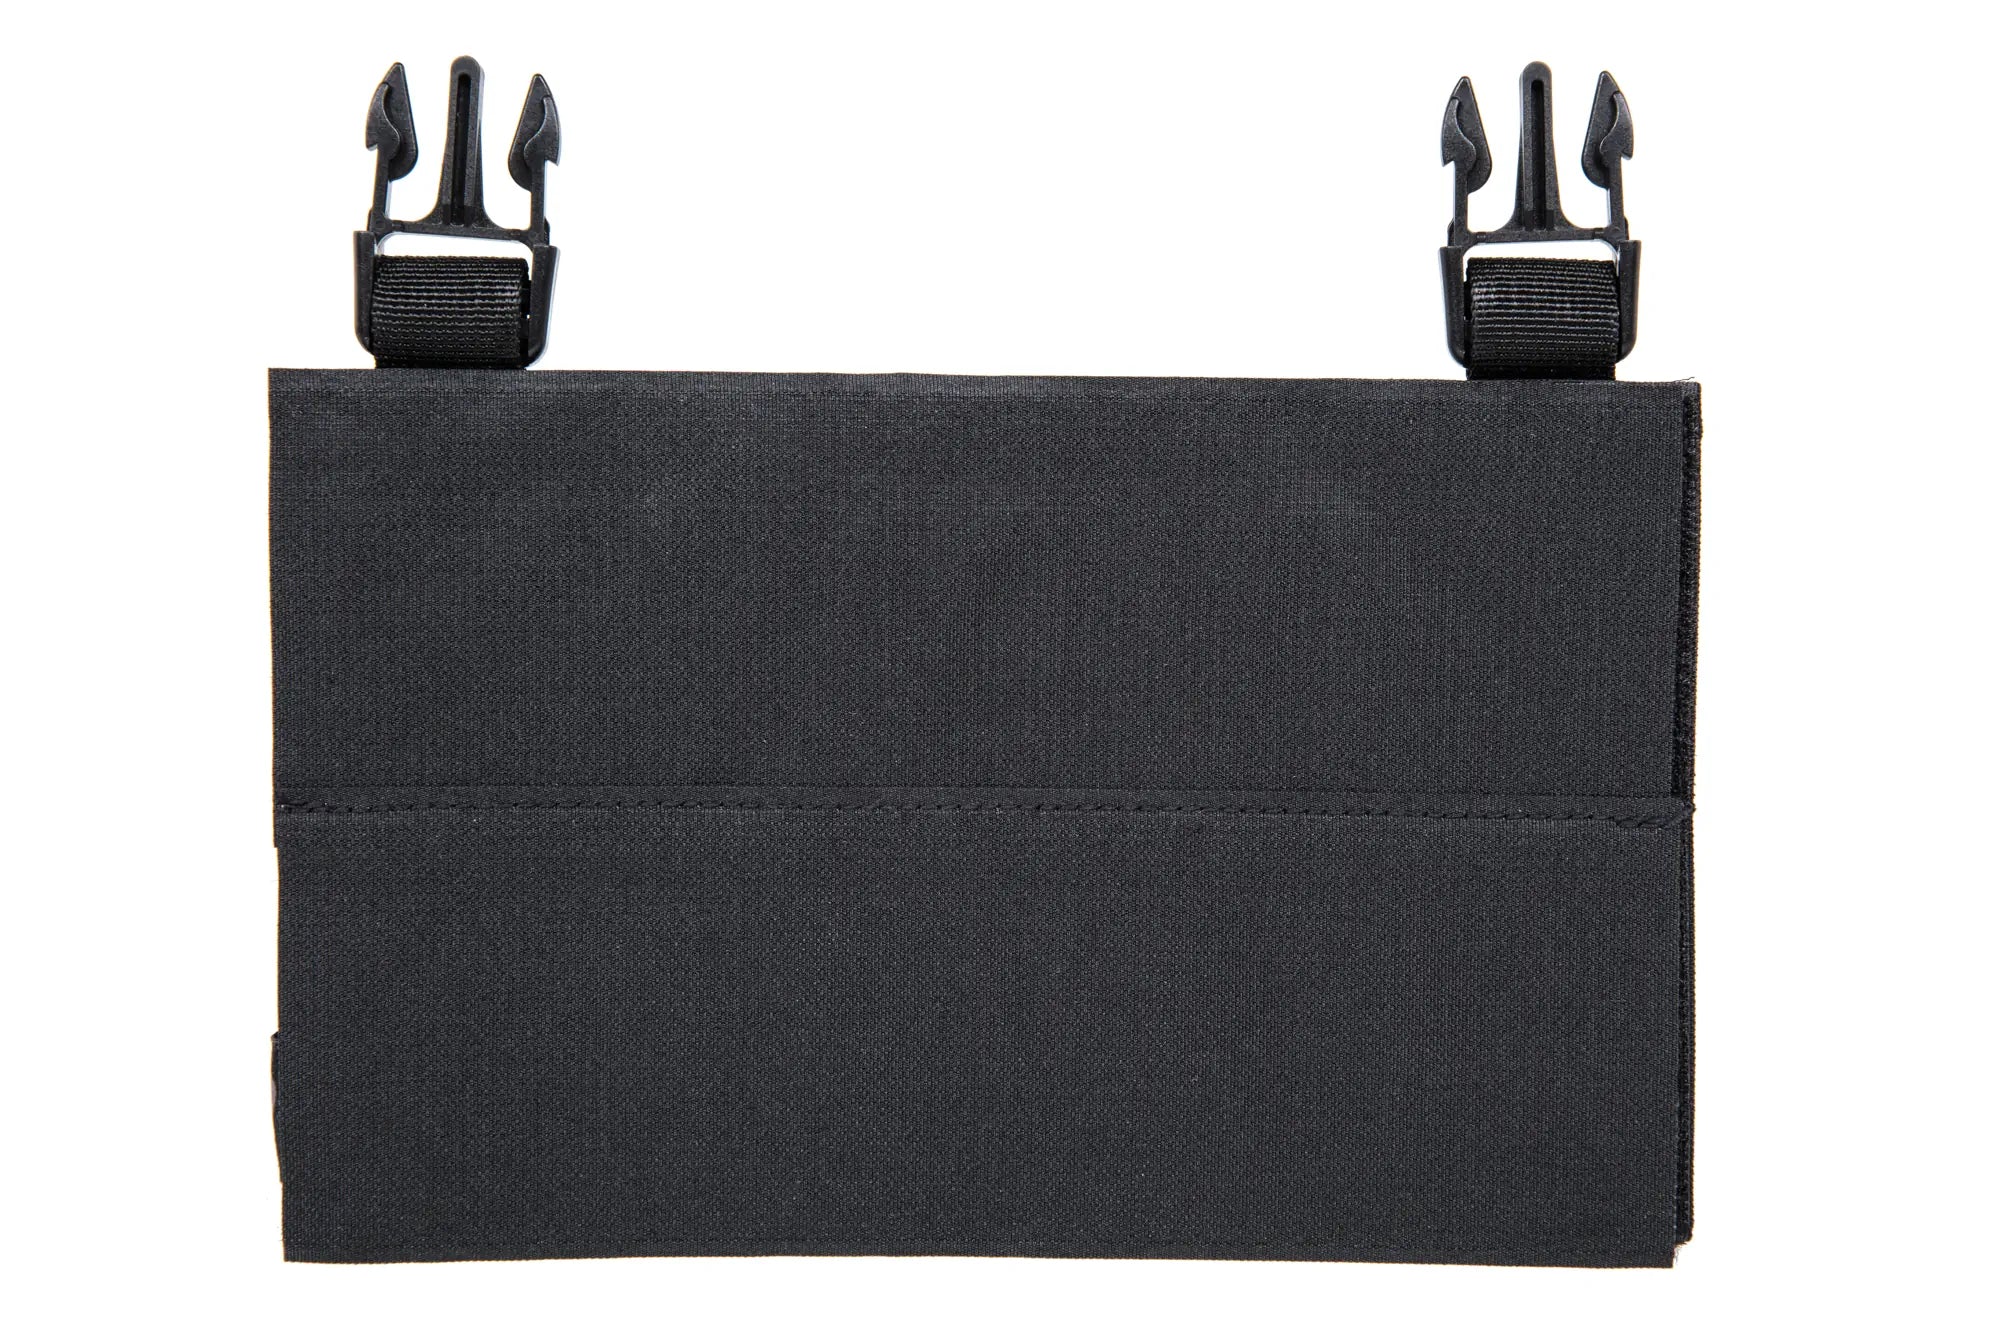 Viper Tactical VX buckle up panel for 4 PM magazines - Black